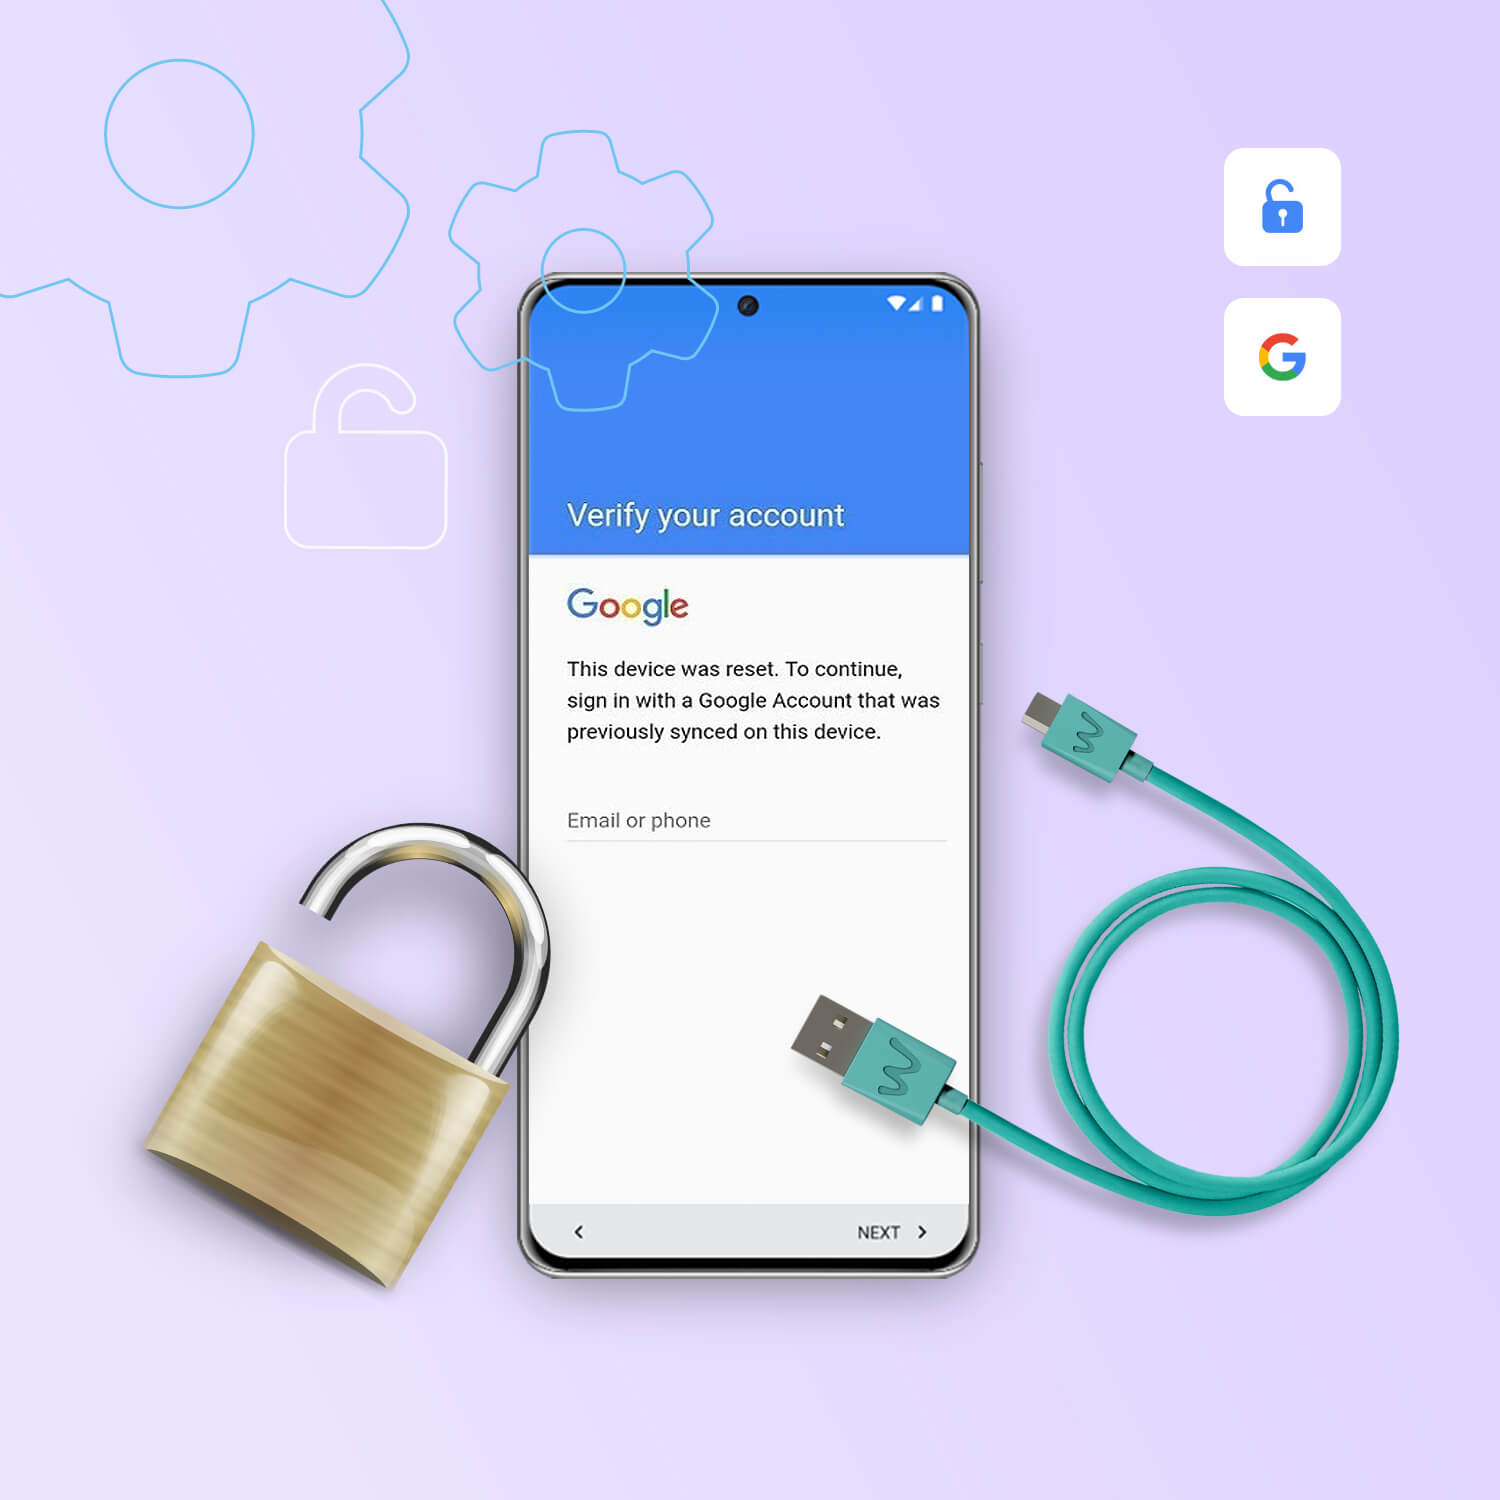 CleanIMEI.com Samsung Google FRP unlock service, detailing the process for bypassing Google Factory Reset Protection on devices for user re-access.